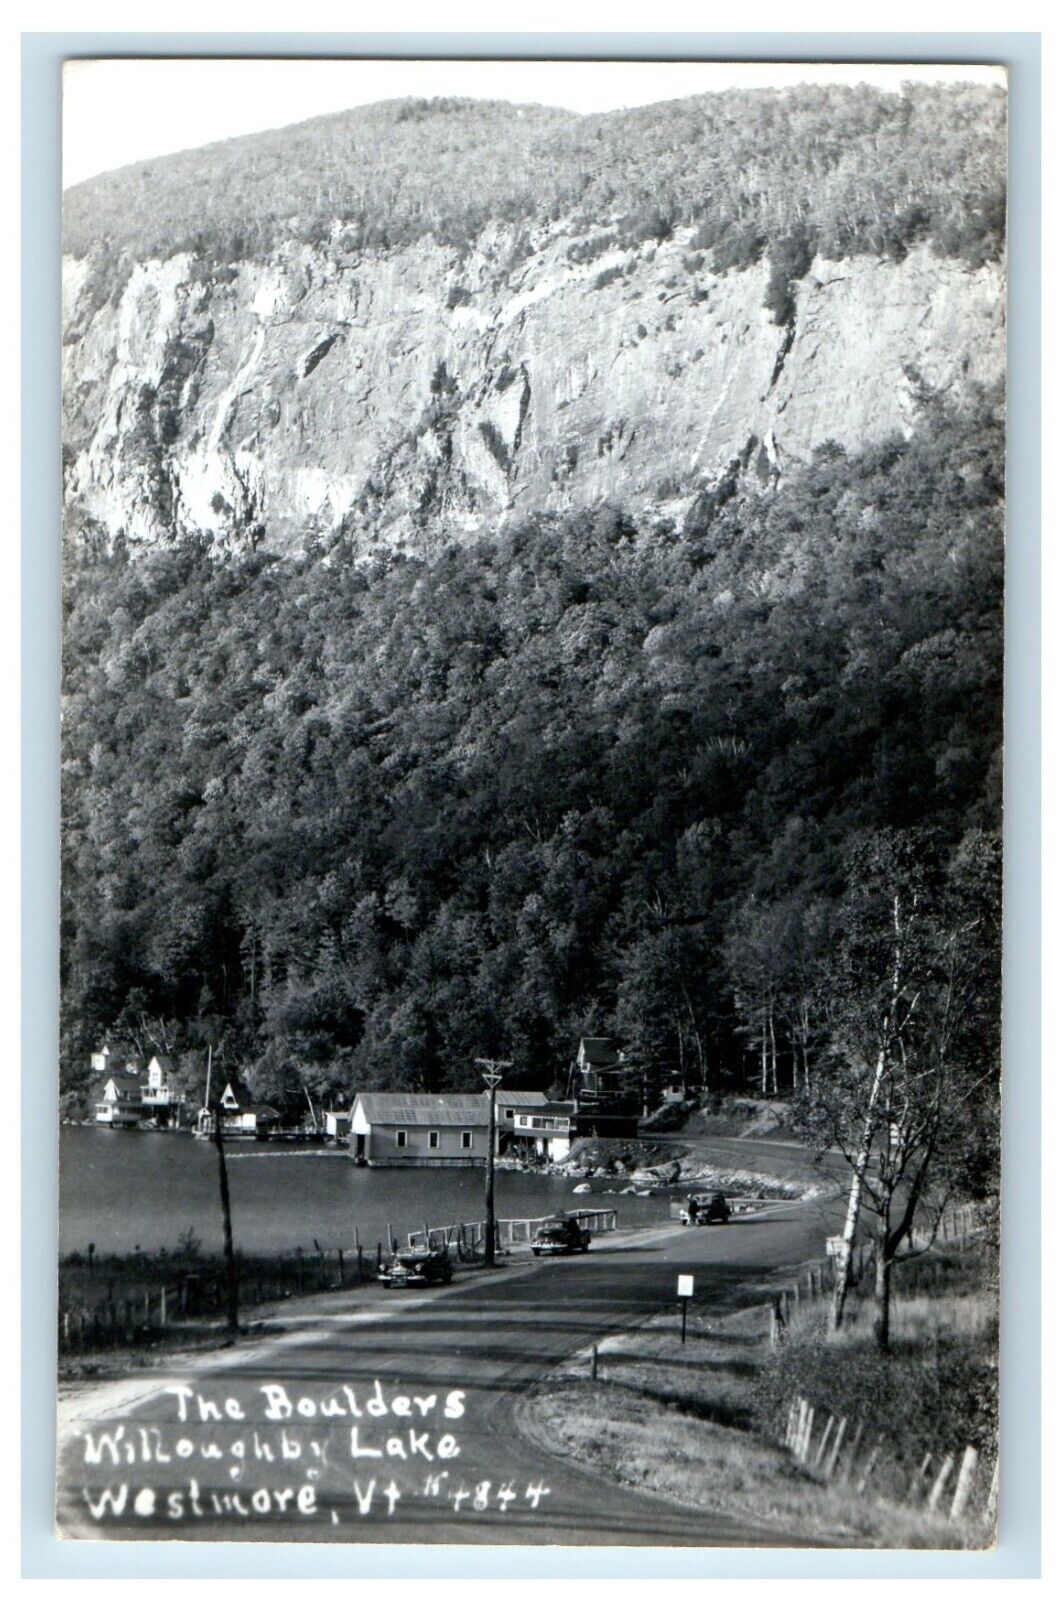 c1950's The Boulders Willoughby Lake Westmore Vermont VT RPPC Photo Postcard